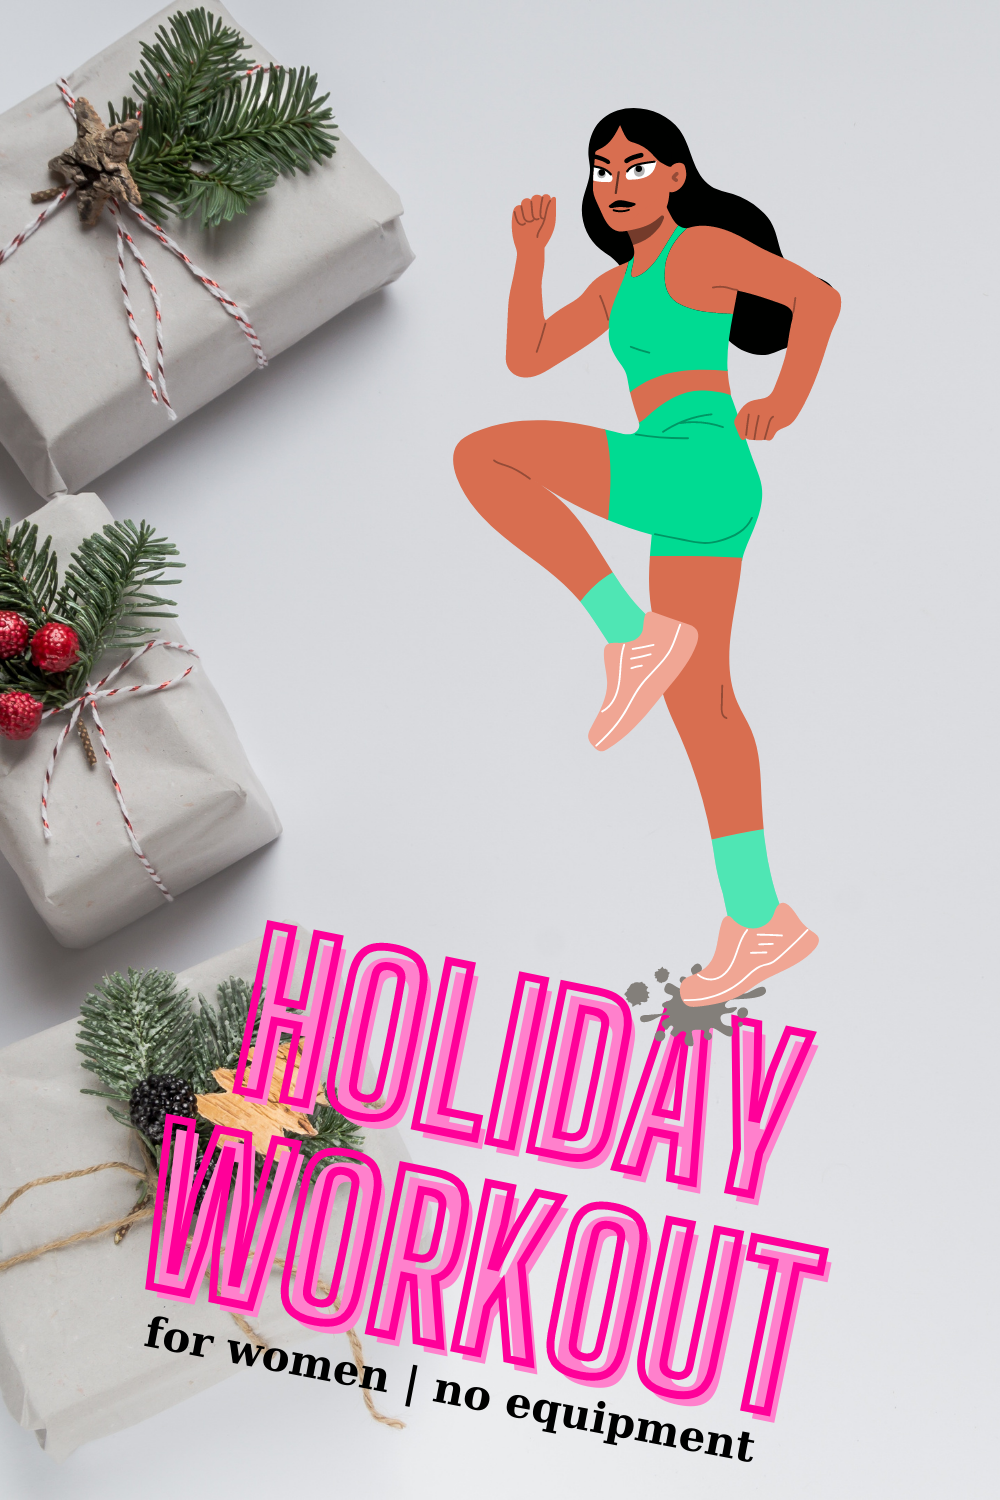 Try this home workout for women during the holidays!